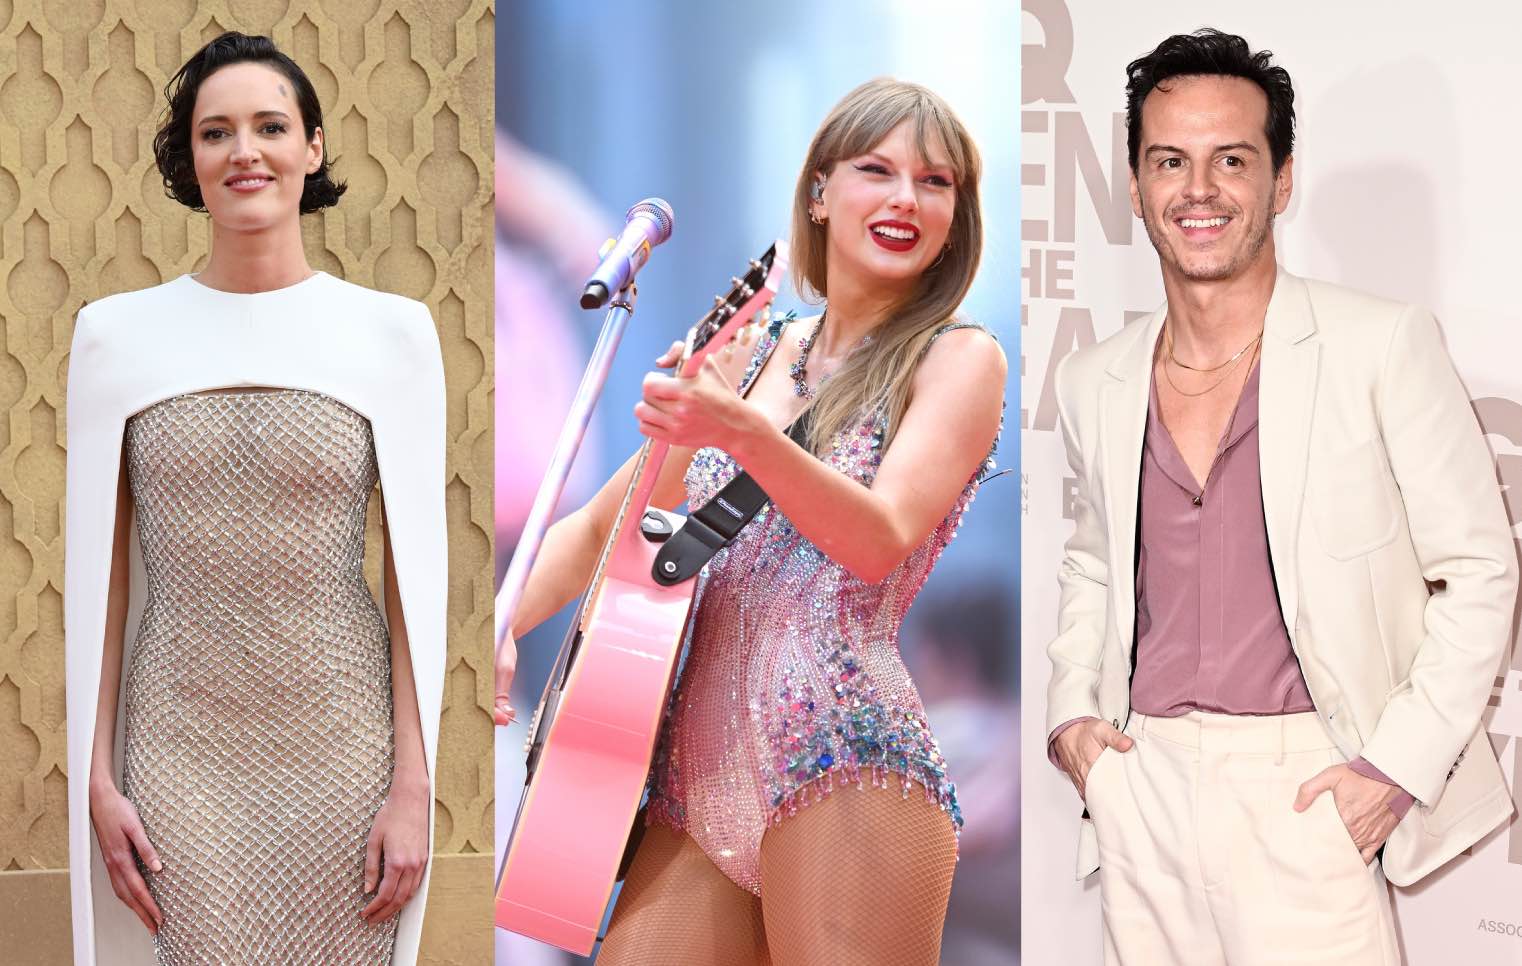 ‘Fleabag’ reunion at Taylor Swift gig as Phoebe Waller-Bridge and Andrew Scott dance together in VIP section